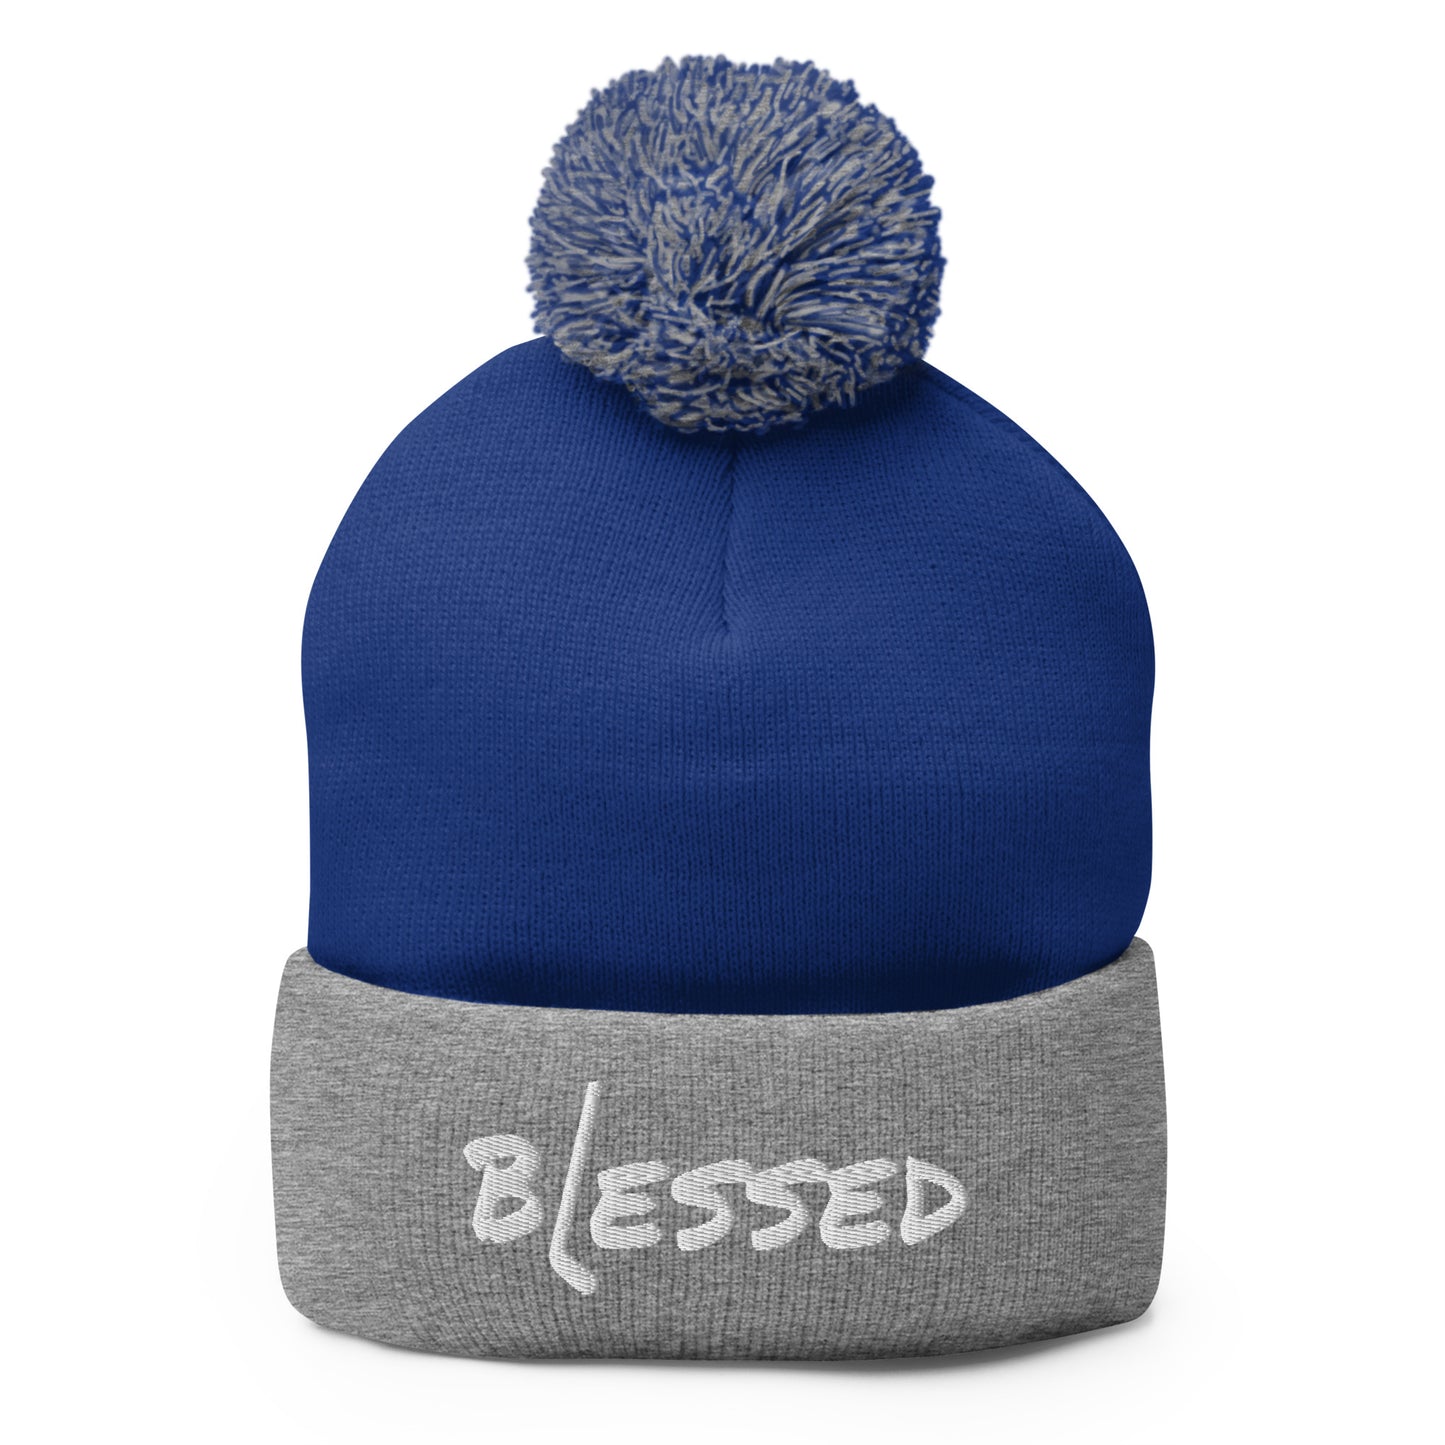 Blessed Beanie